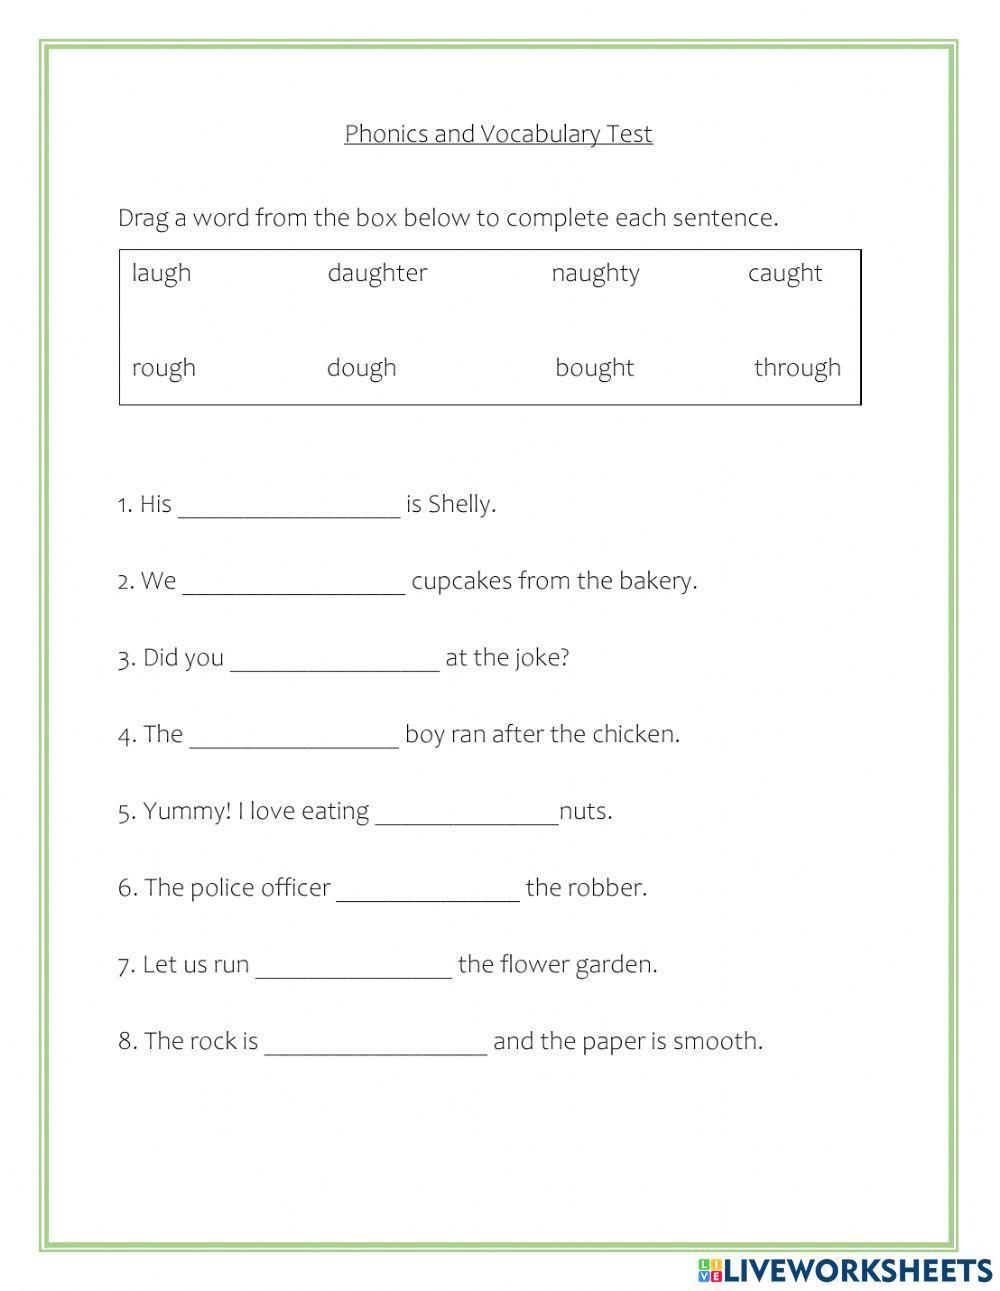 Phonics and Vocabulary April 16th Test